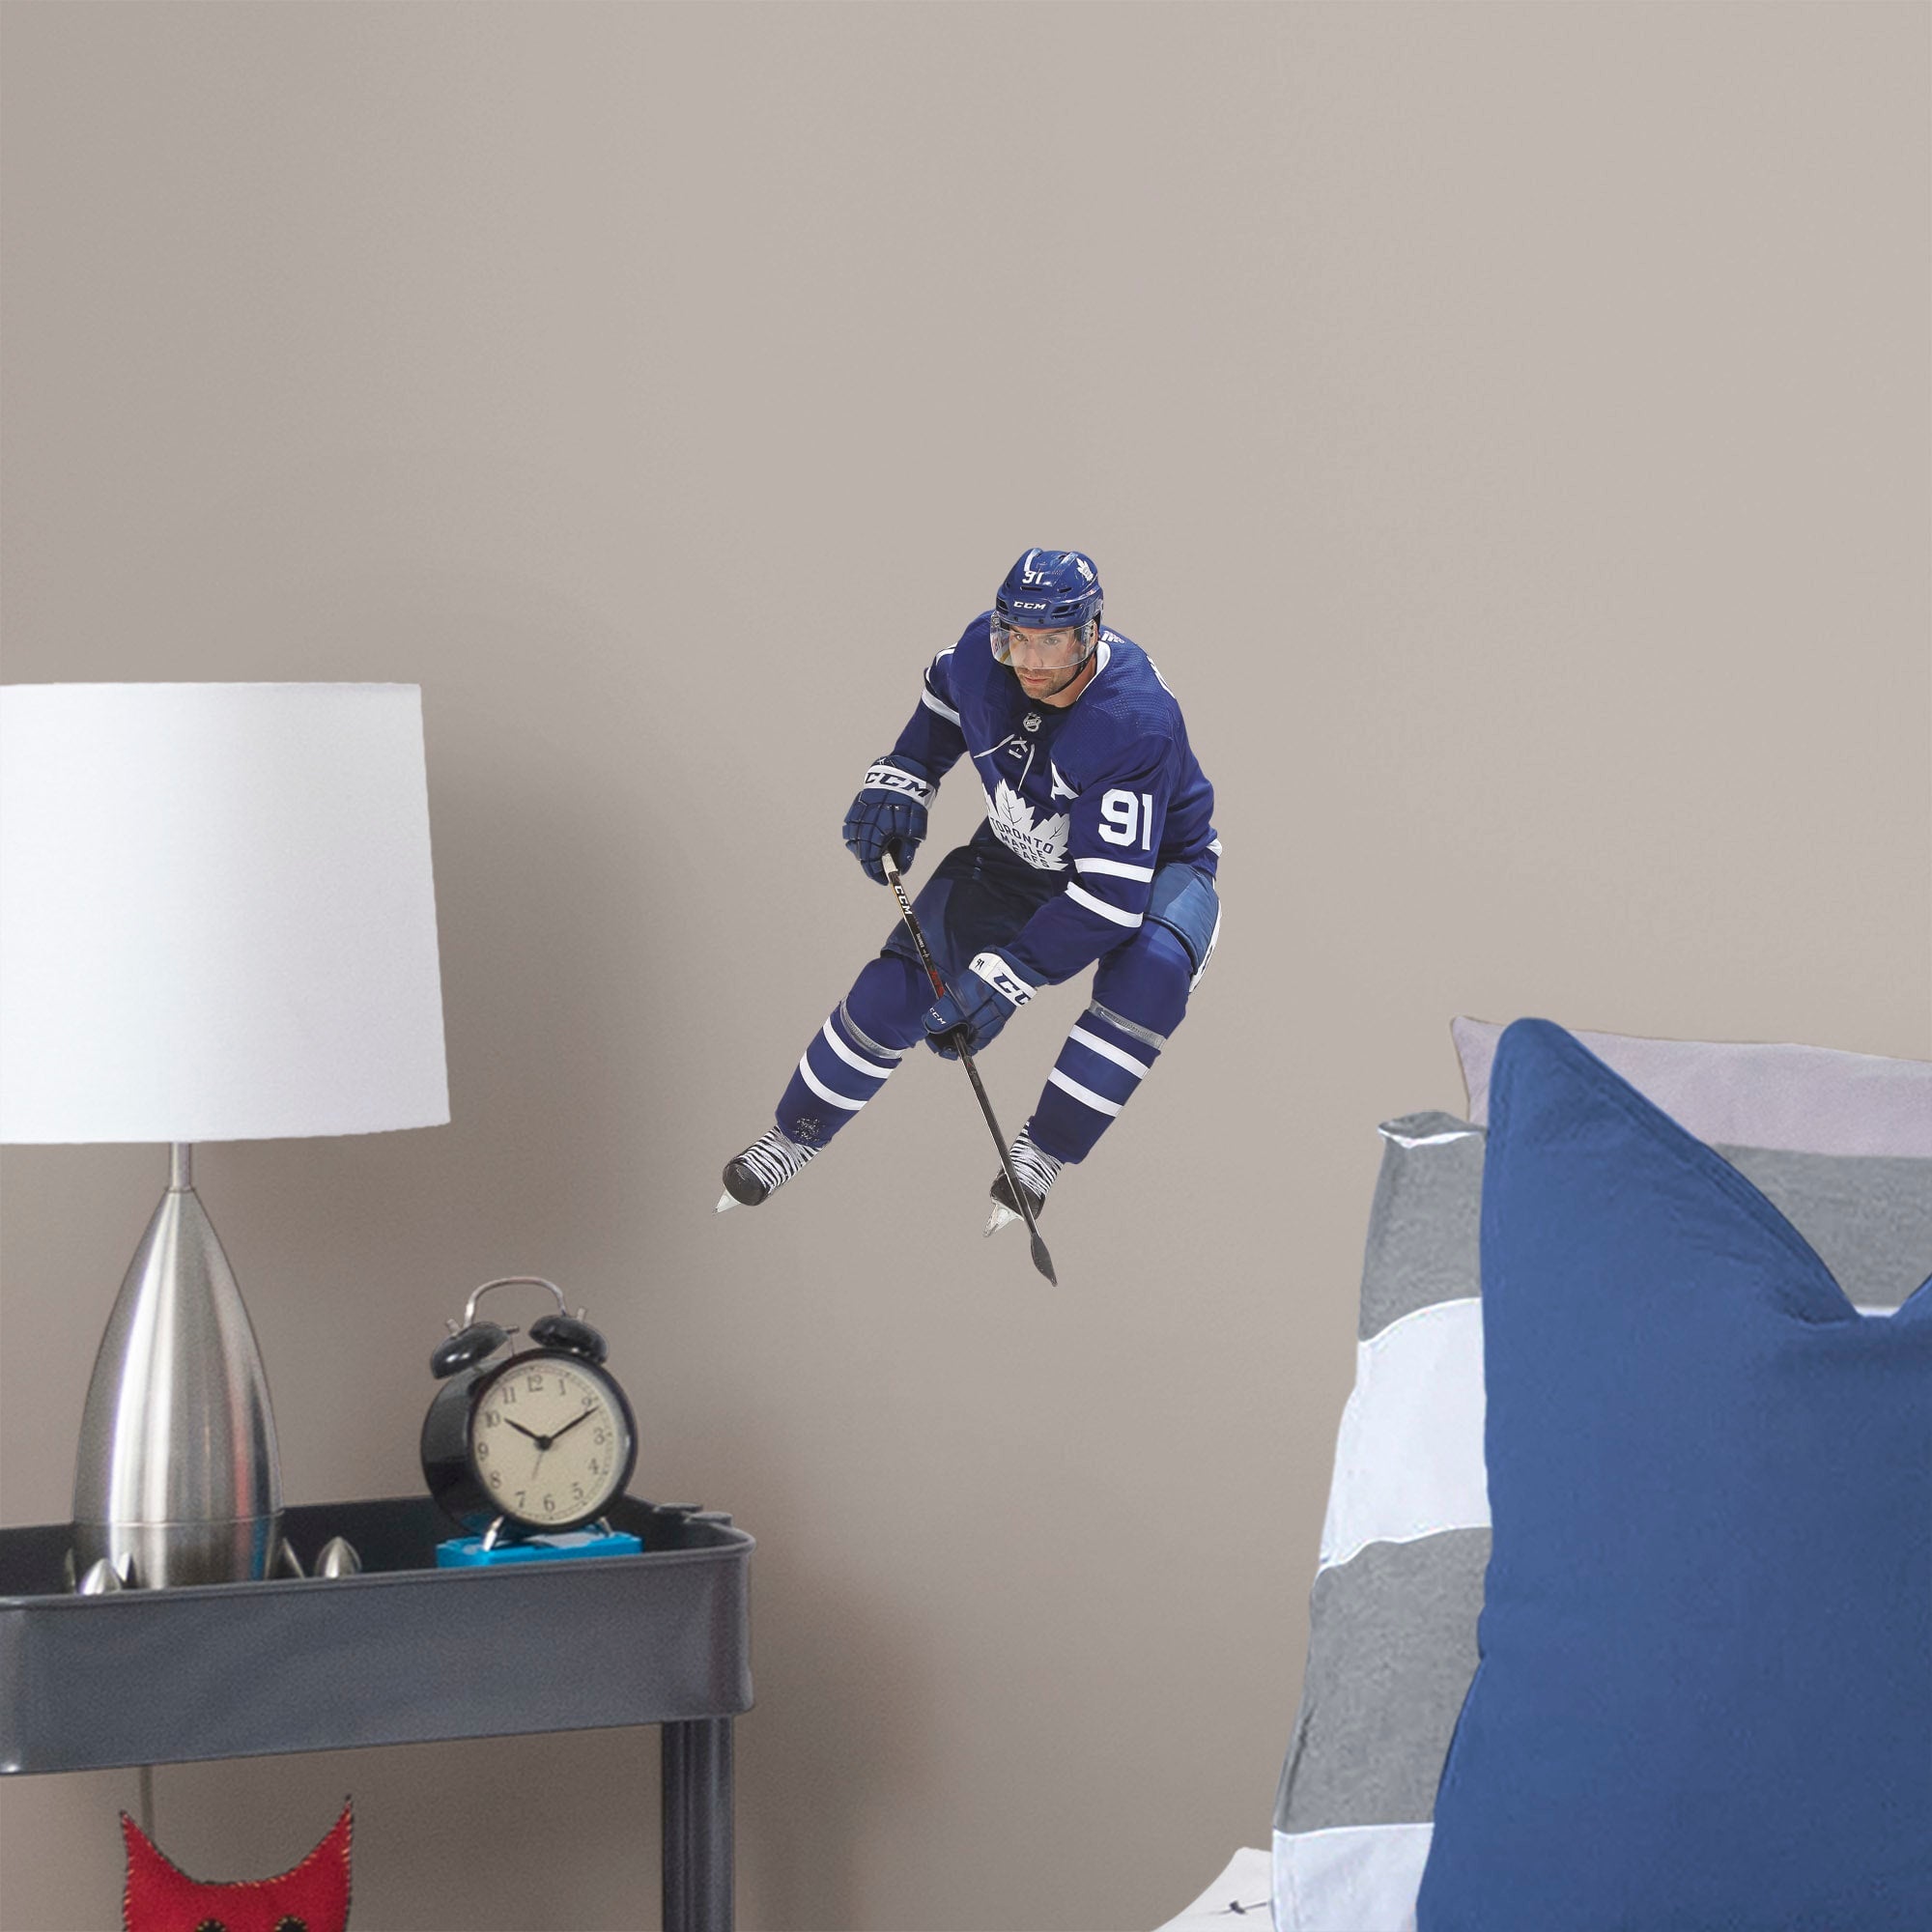 John Tavares for Toronto Maple Leafs - Officially Licensed NHL Removable Wall Decal Large by Fathead | Vinyl